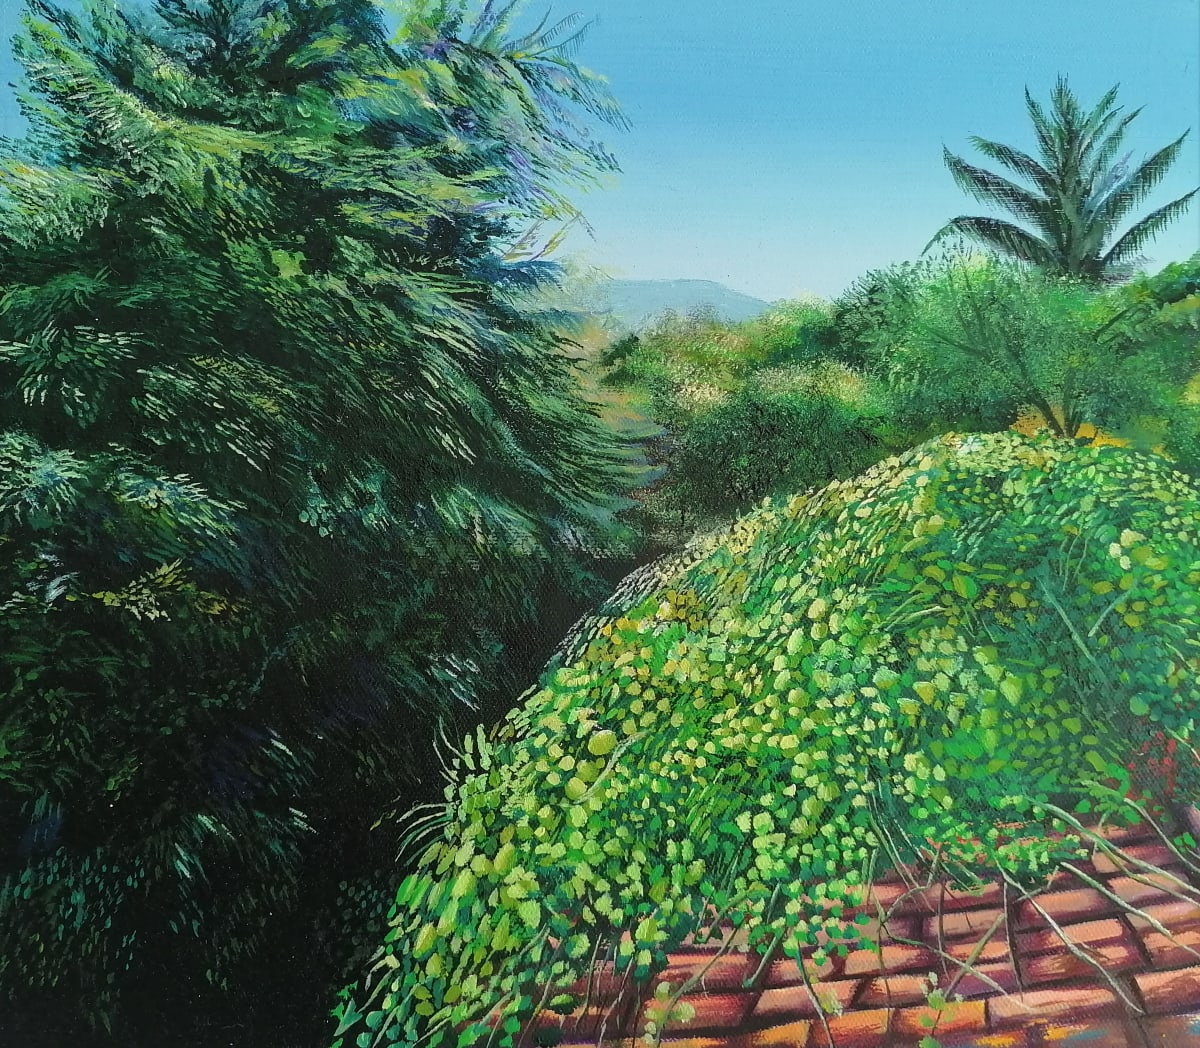 Roof tiles, Oaxaca  Image: These clay roof tiles belong to one of the houses built at the Coast of Oaxaca. I painted this artwork to preserve the contrast between the green background of the landscape and how leaves have covered the roof.